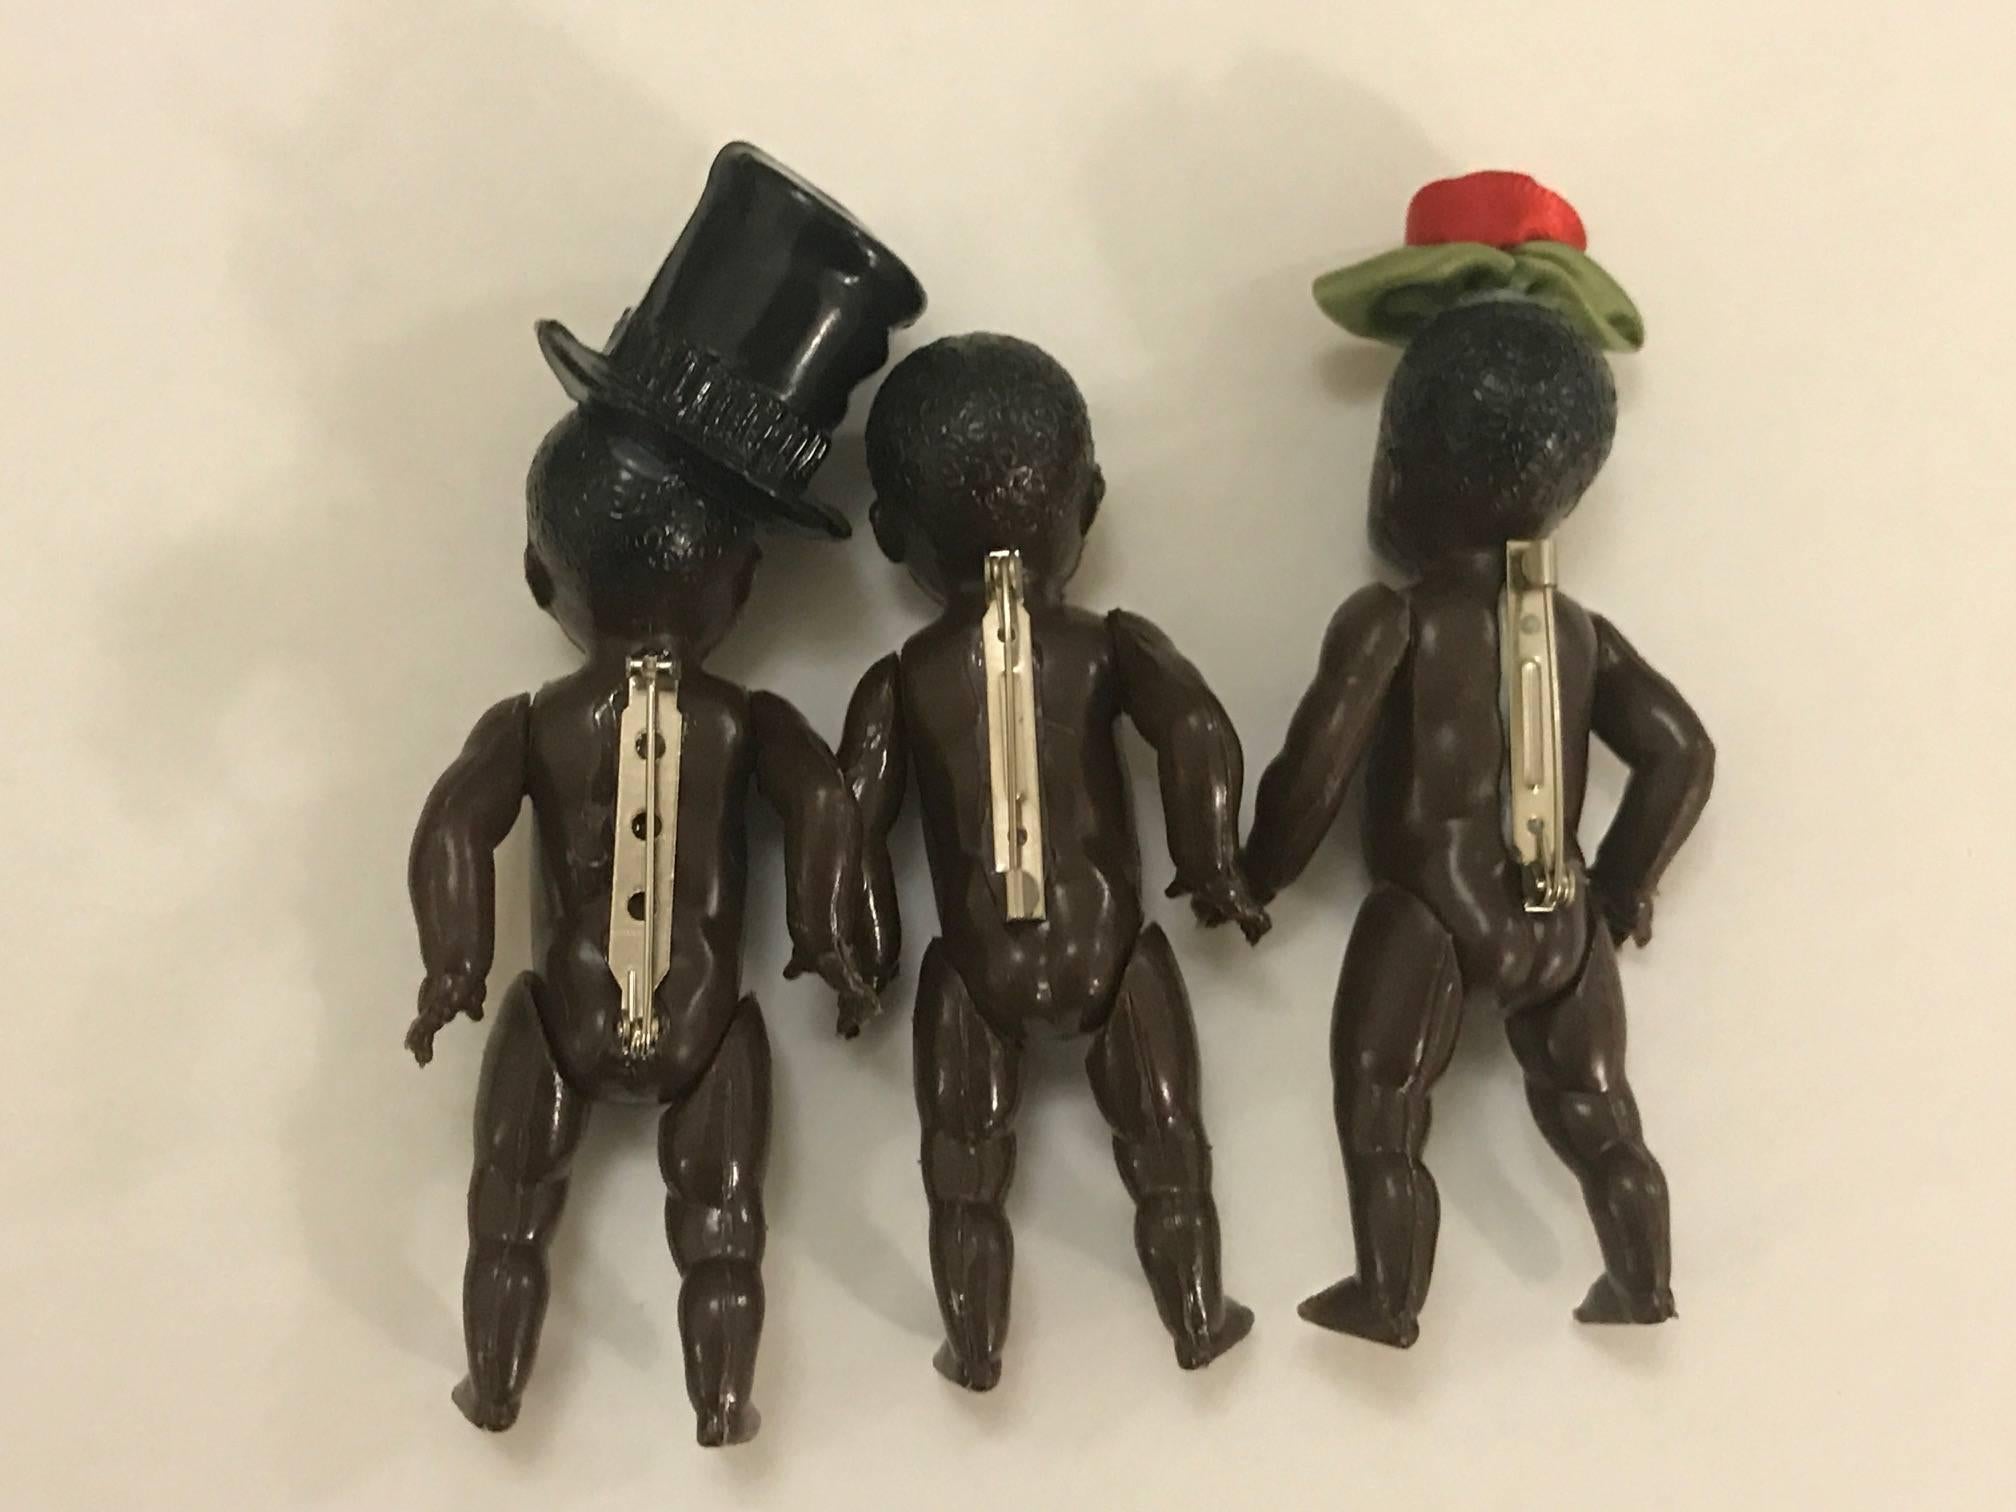 Set of three Patrick Kelly 1980s baby doll pins, one plain, one with a black top hat, and one with a rose bud topper. 

Patrick & volunteers would sit in the studio adding pins and accessories to tons of these dime-store plastic baby dolls to give